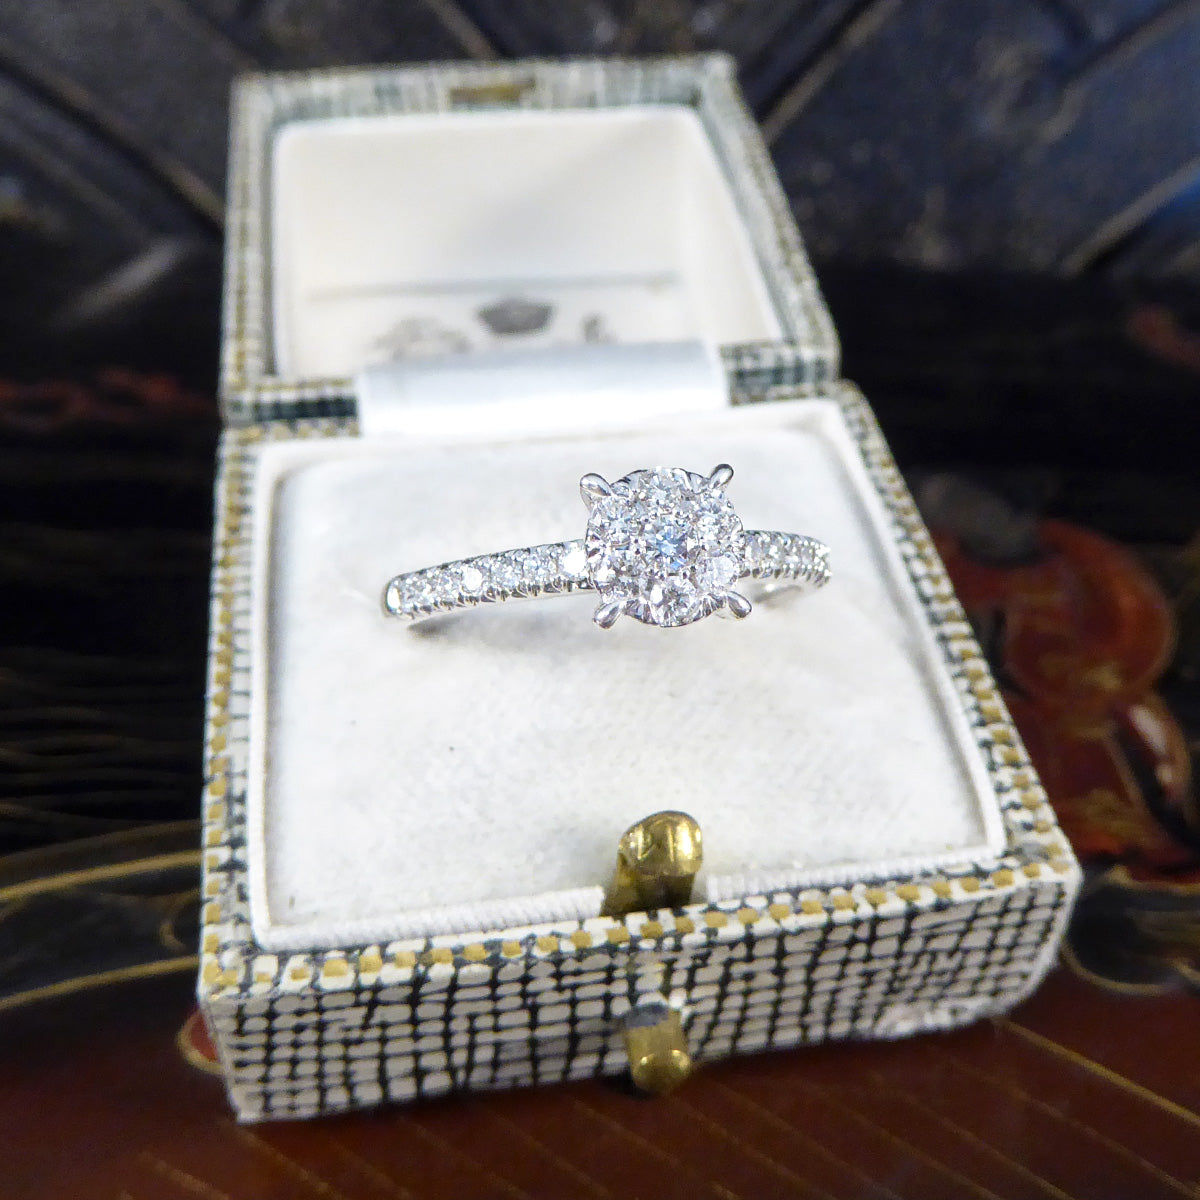 Solitaire Illusion set Diamond Cluster Ring in White Gold with Diamond Shoulders